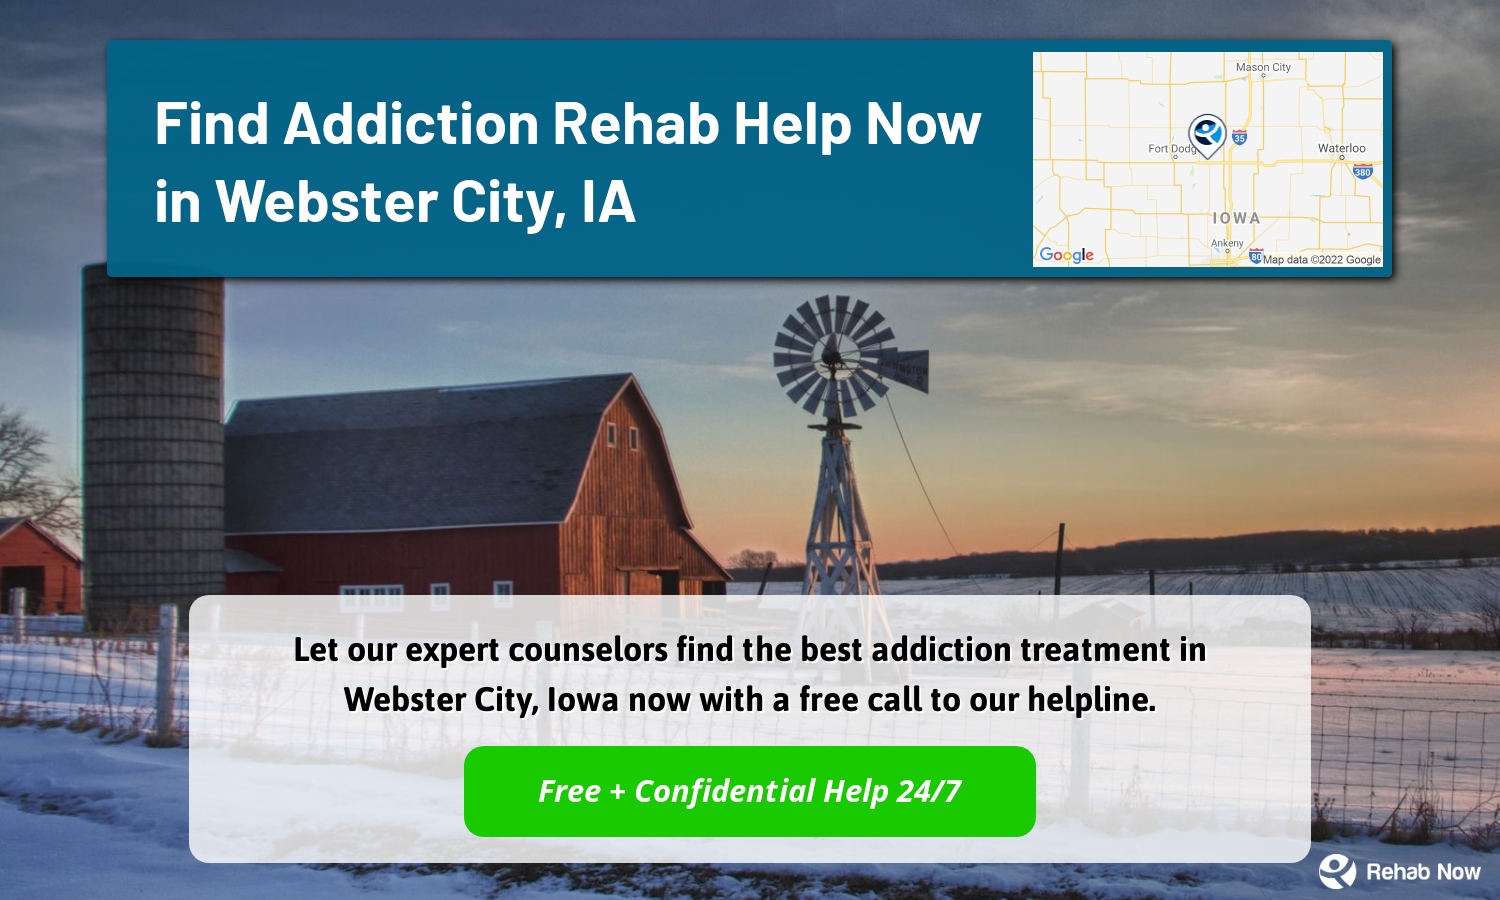 Let our expert counselors find the best addiction treatment in Webster City, Iowa now with a free call to our helpline.